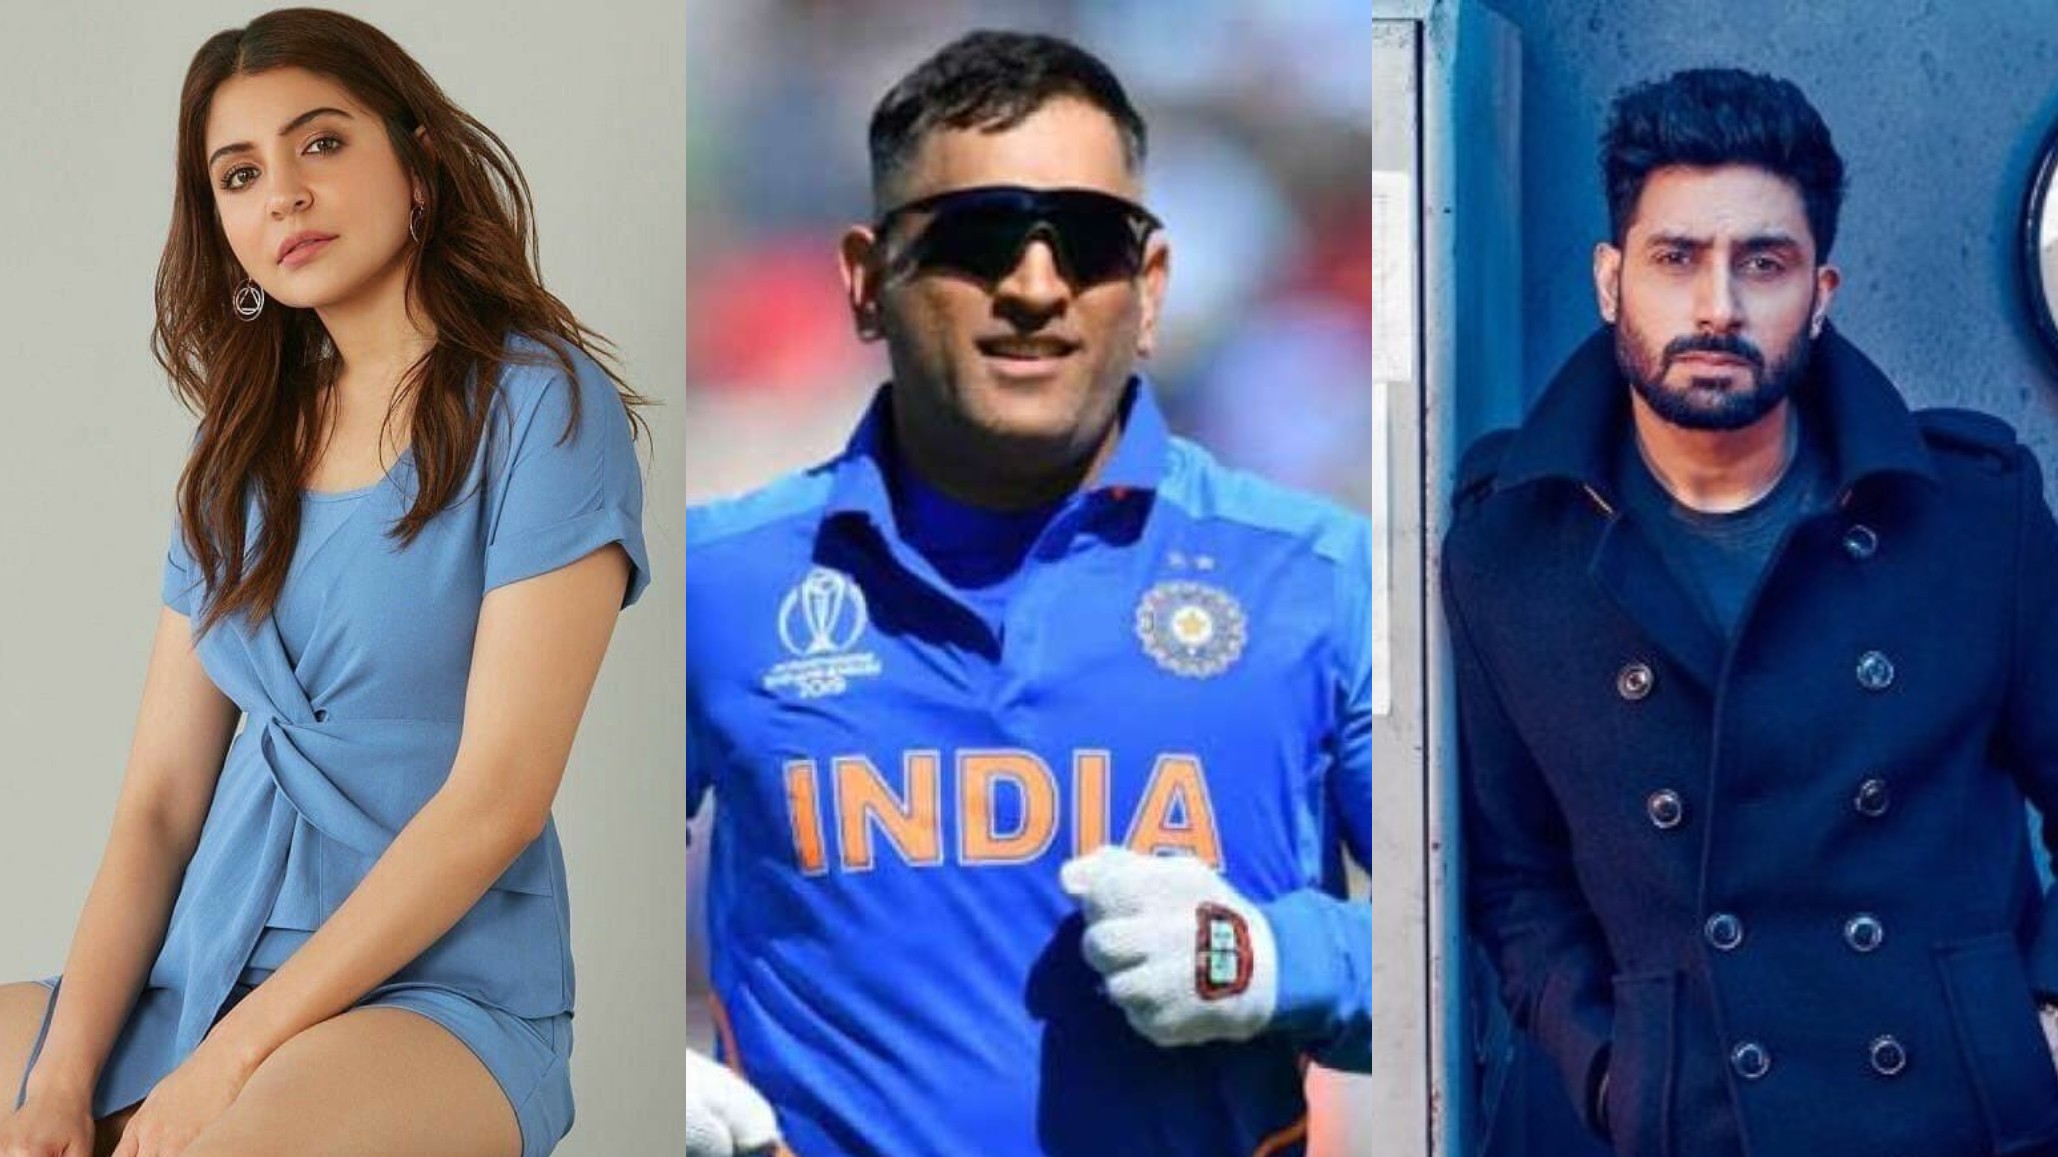 Bollywood wishes MS Dhoni good luck after he announces his retirement